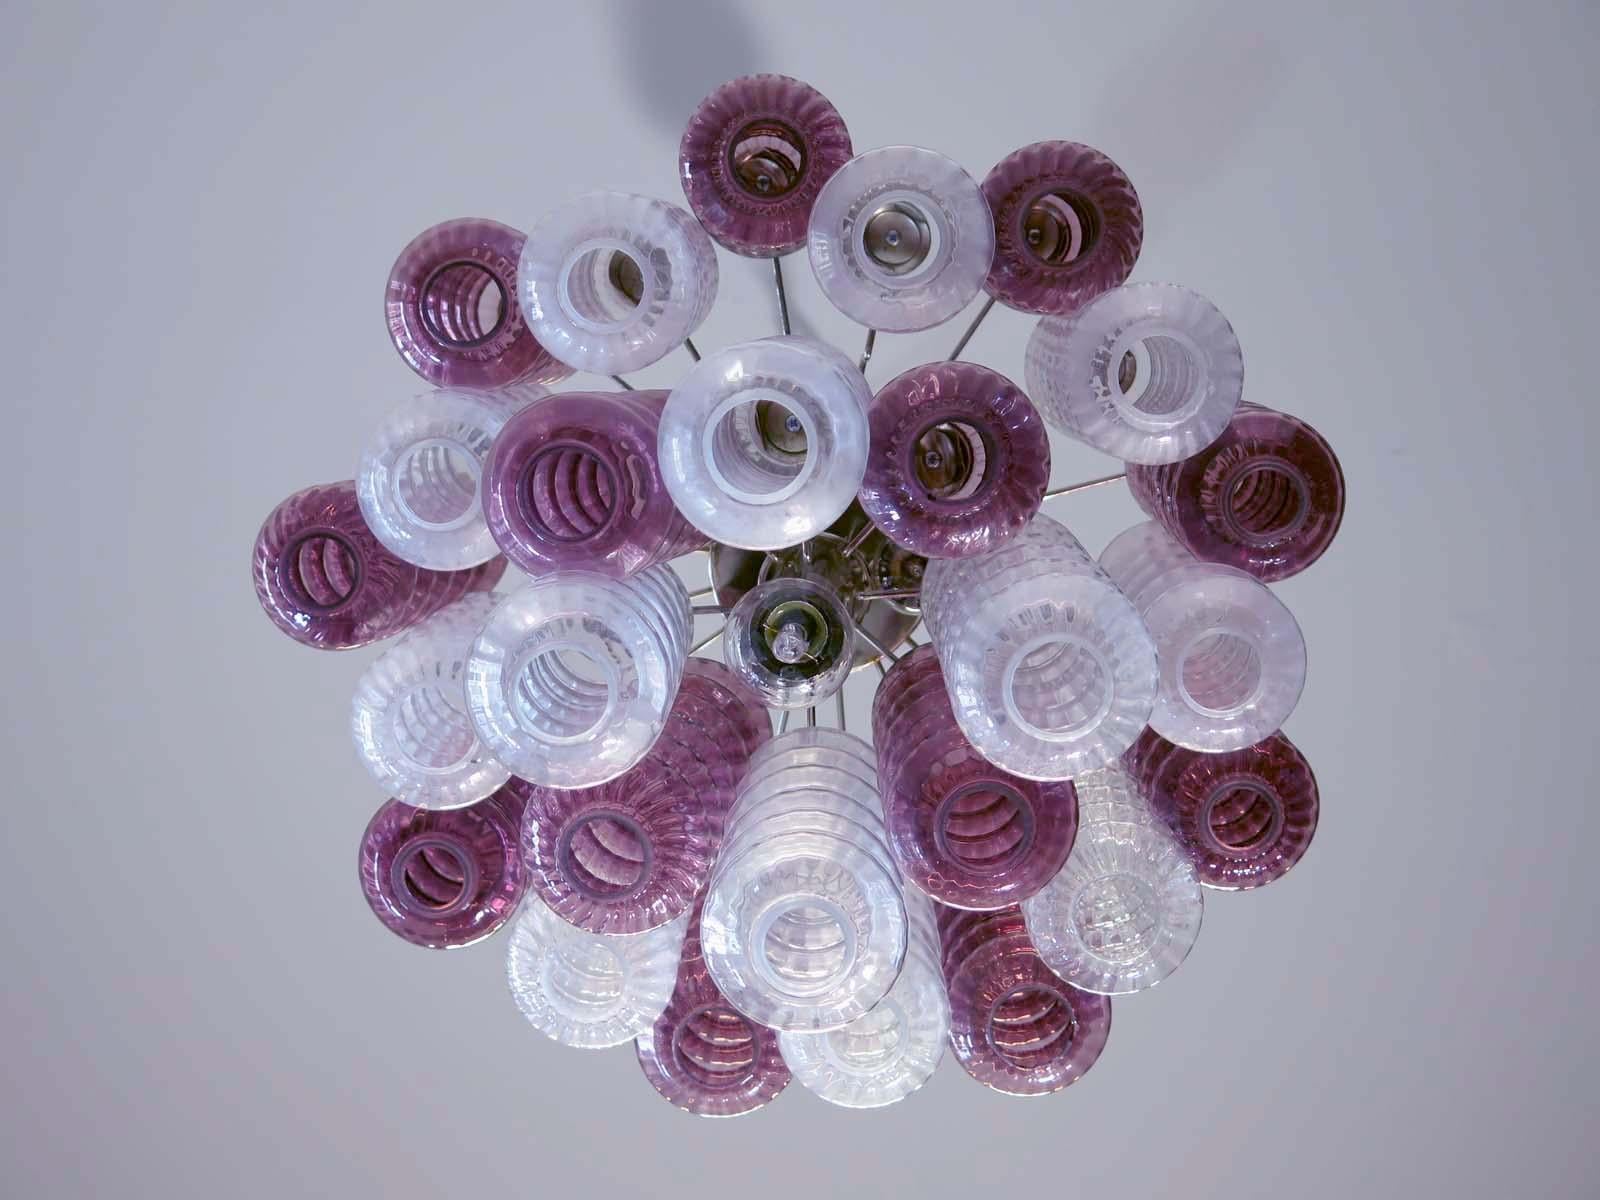 Rare Top Quality Murano Vintage Chandelier, Transparent and Purple Glass 1